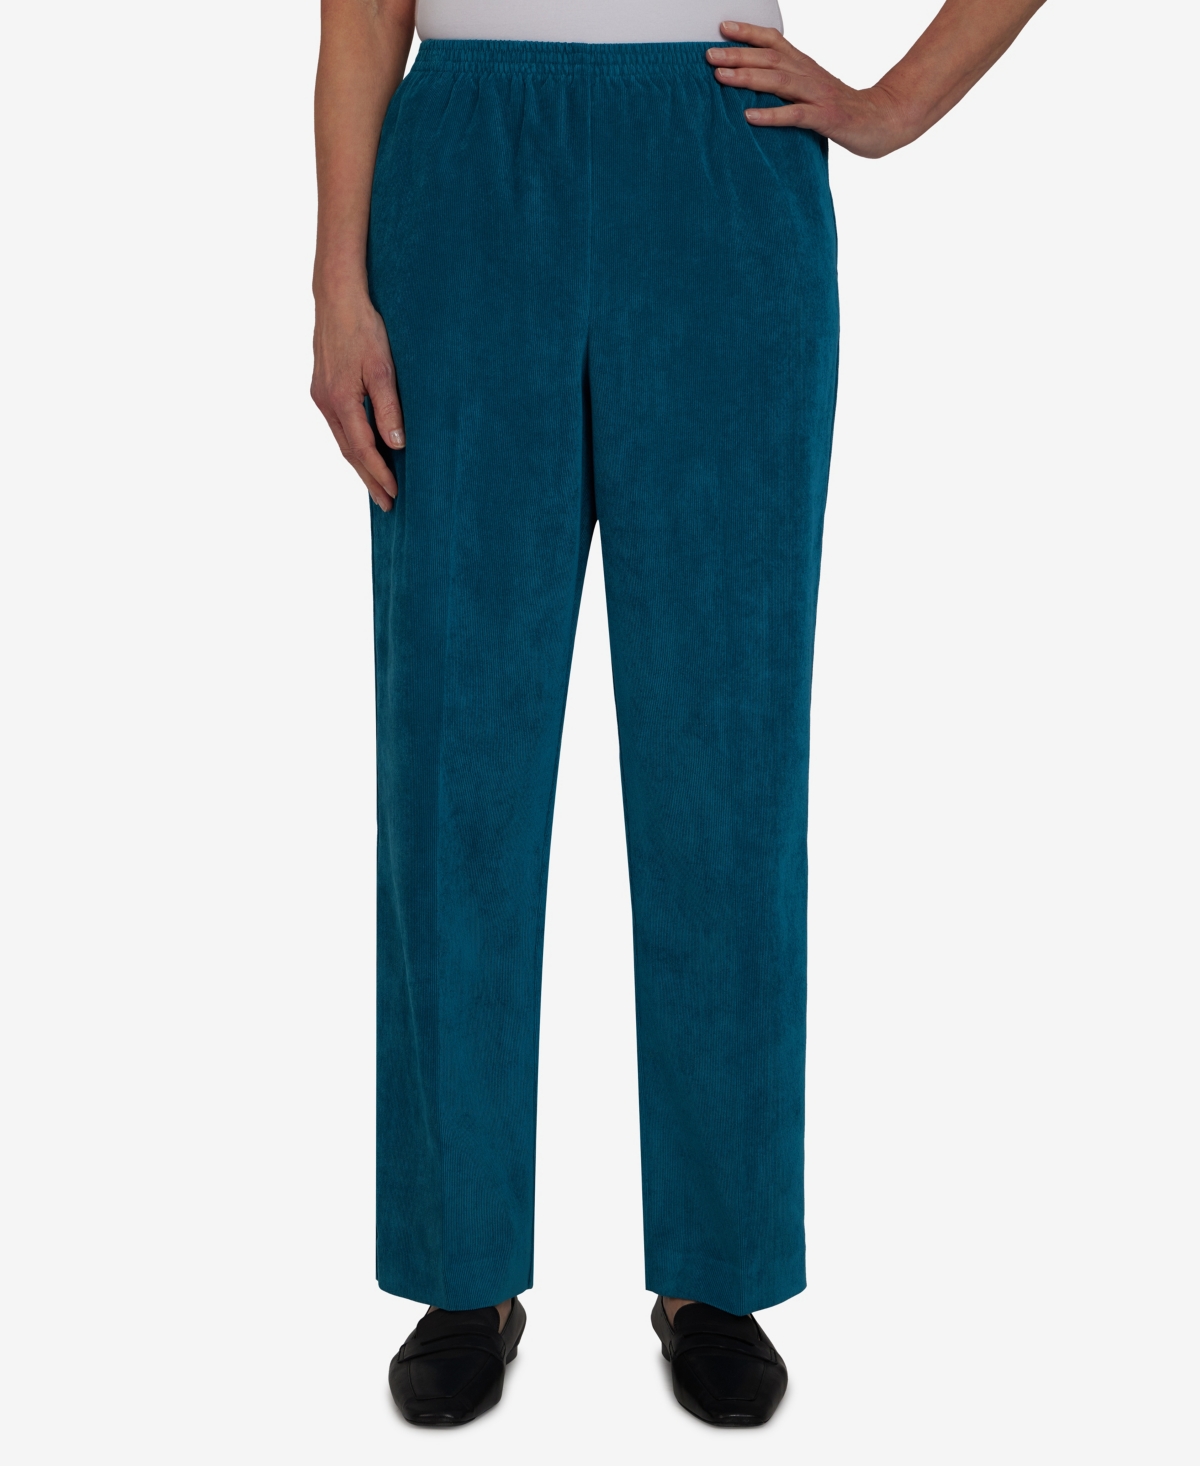 Alfred Dunner Petite Classics Pull-on Corduroy Straight Leg Pants, Petite & Petite Short In Teal